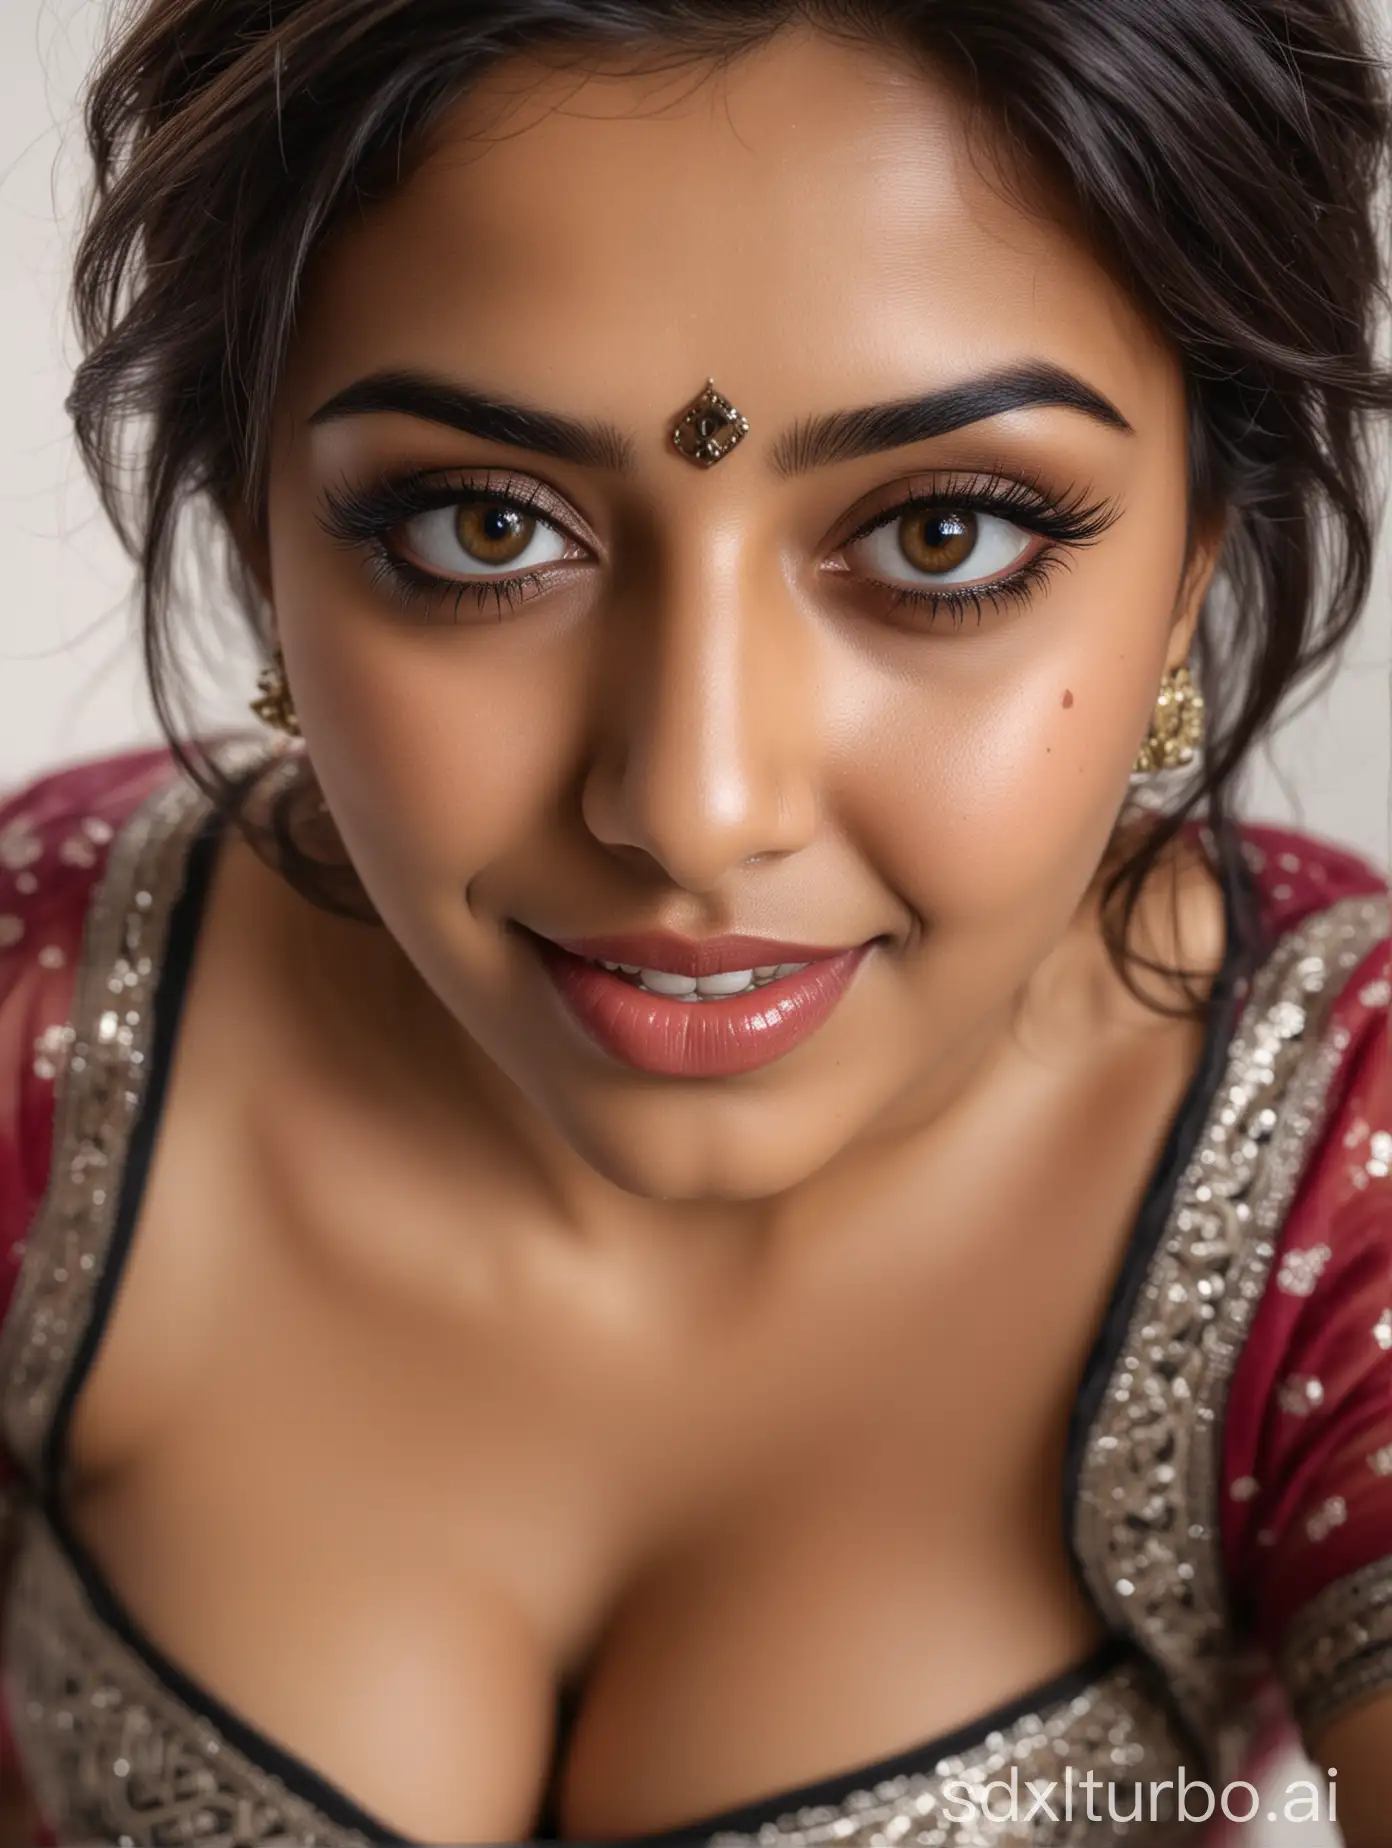 full body of Extreme close-up ultra-wide-angle shot from high above, front view, stunningly beautiful 35 years busty and curvy indian girl with perfect symmetric eyes and teeth. she is wearing a transparent saree, perfectly shaped legs, thin face, dark eyeliner and makeup, professional 8k photography drenched in natural light, comfy pose, captivating smile gracing her features,